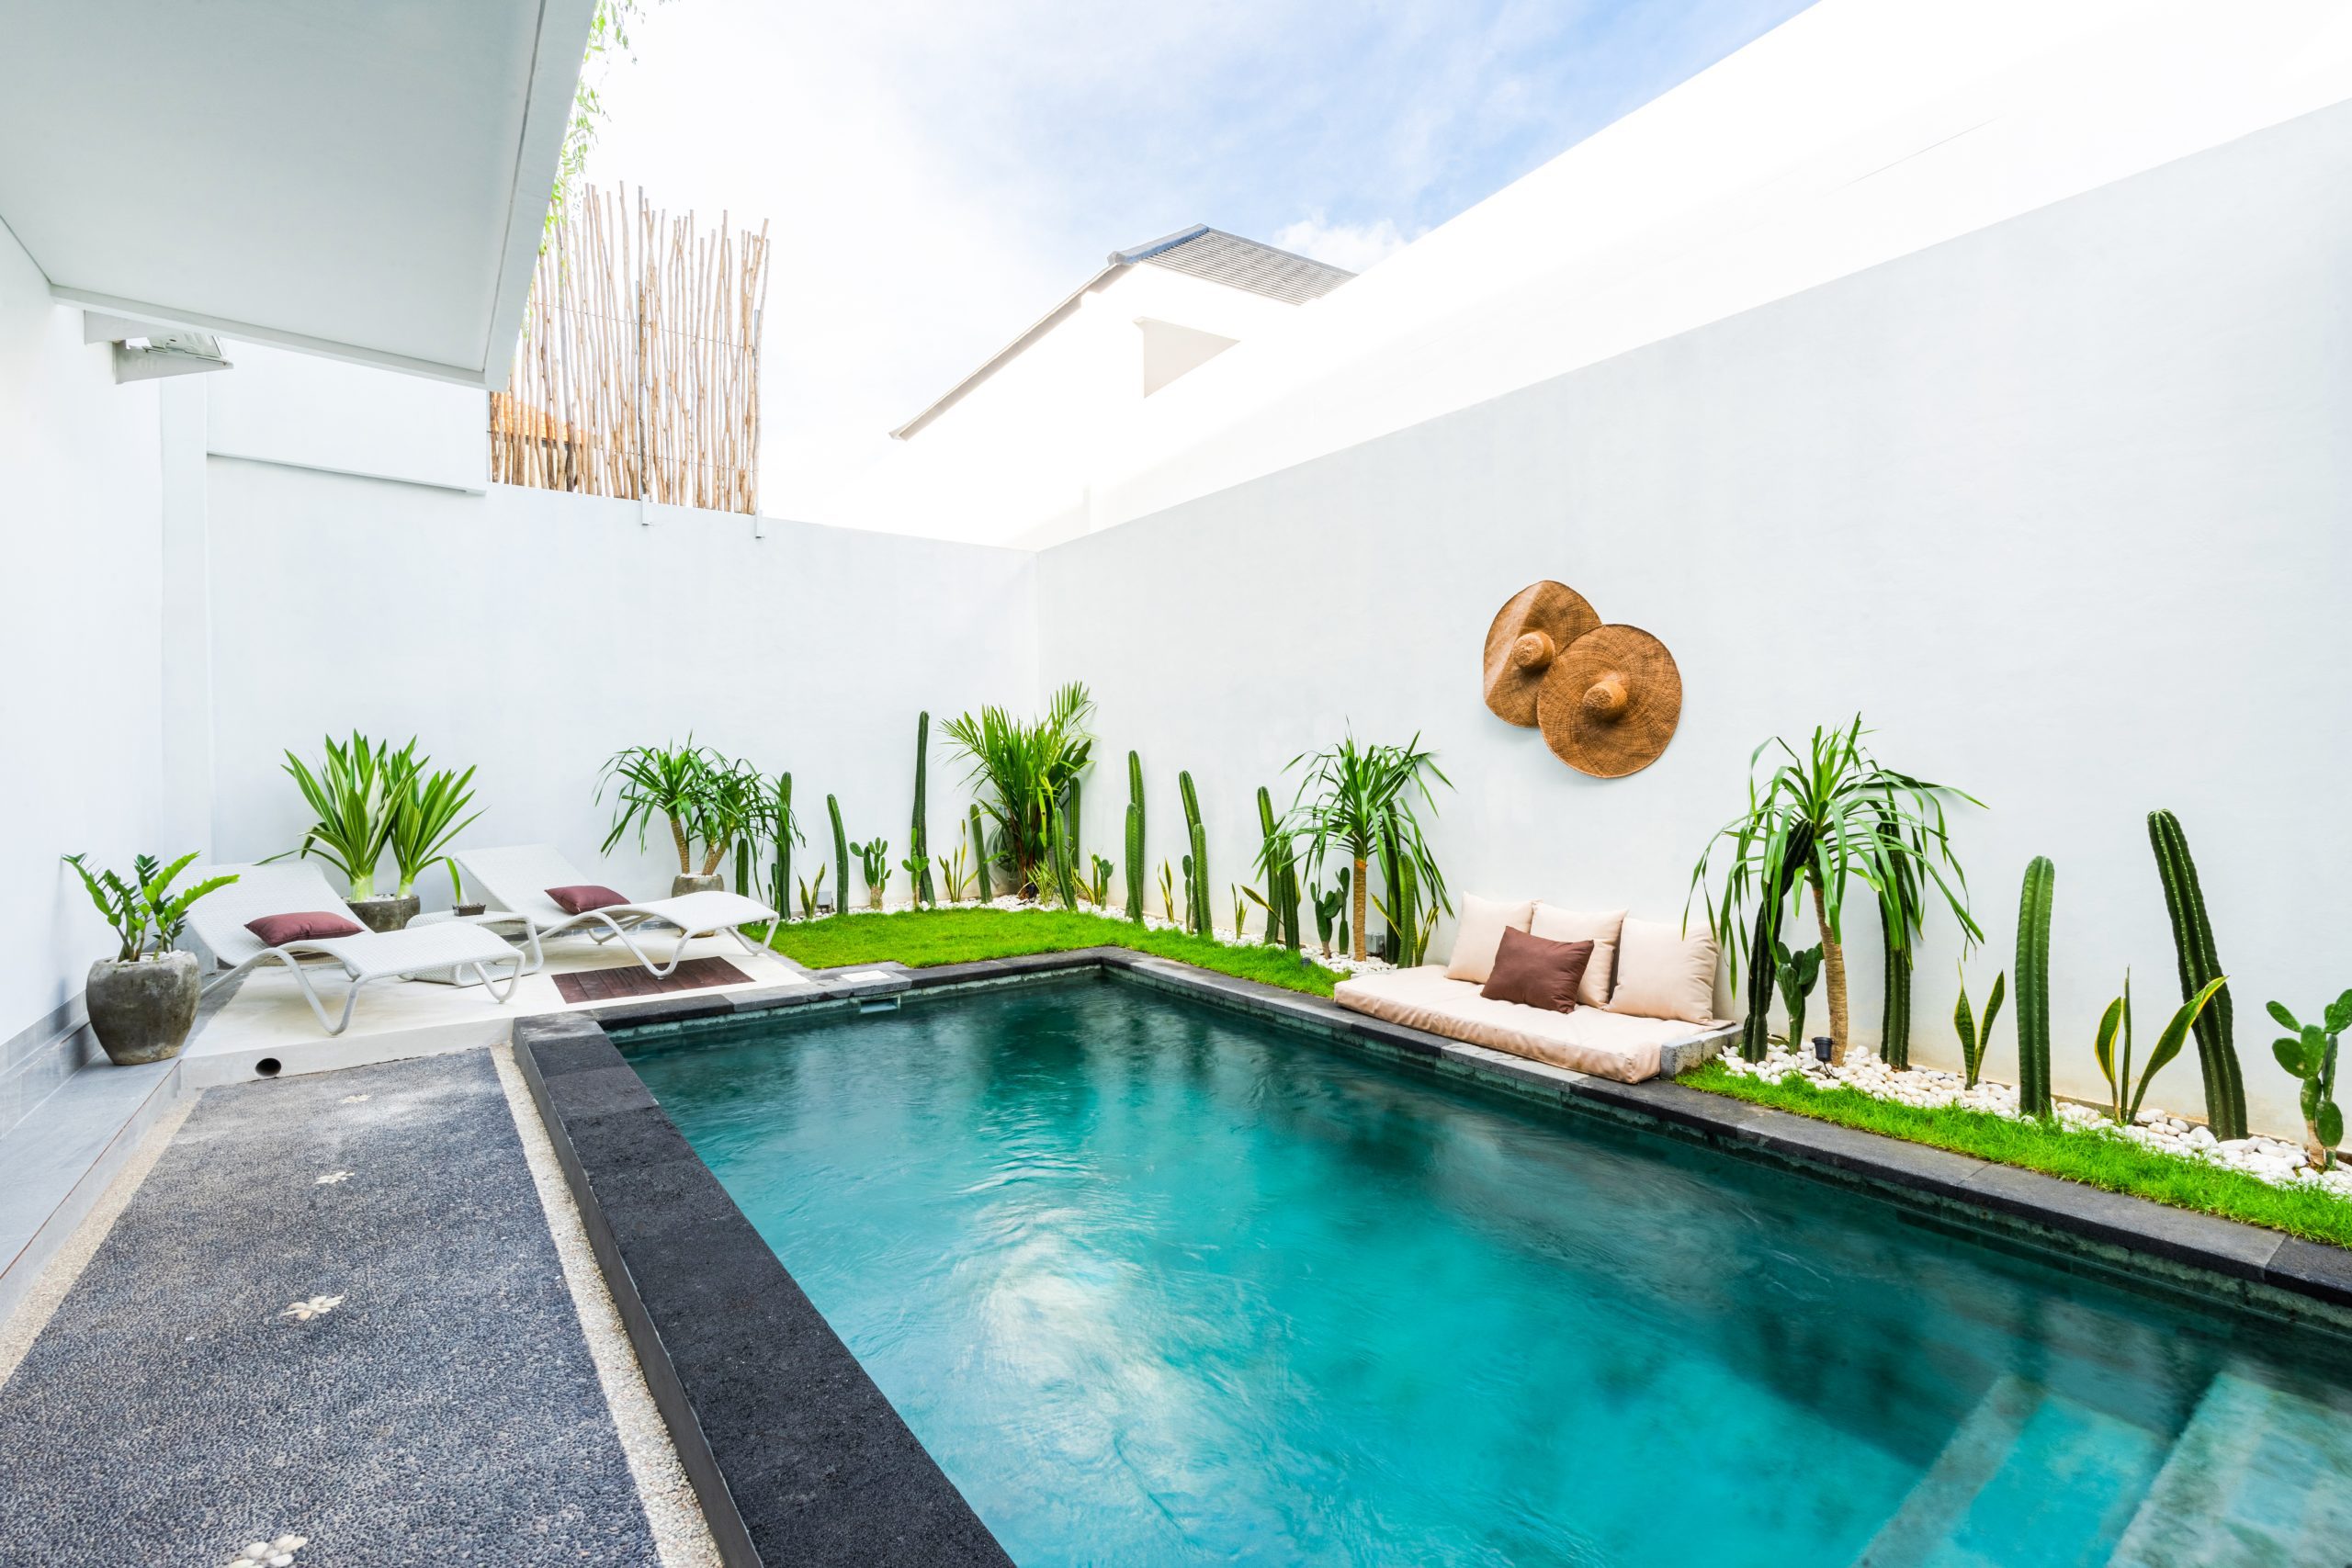 Contemporary modern villa with 3 bedrooms, private pool oasis, and spacious living area in a stunning location of Canggu, Bali